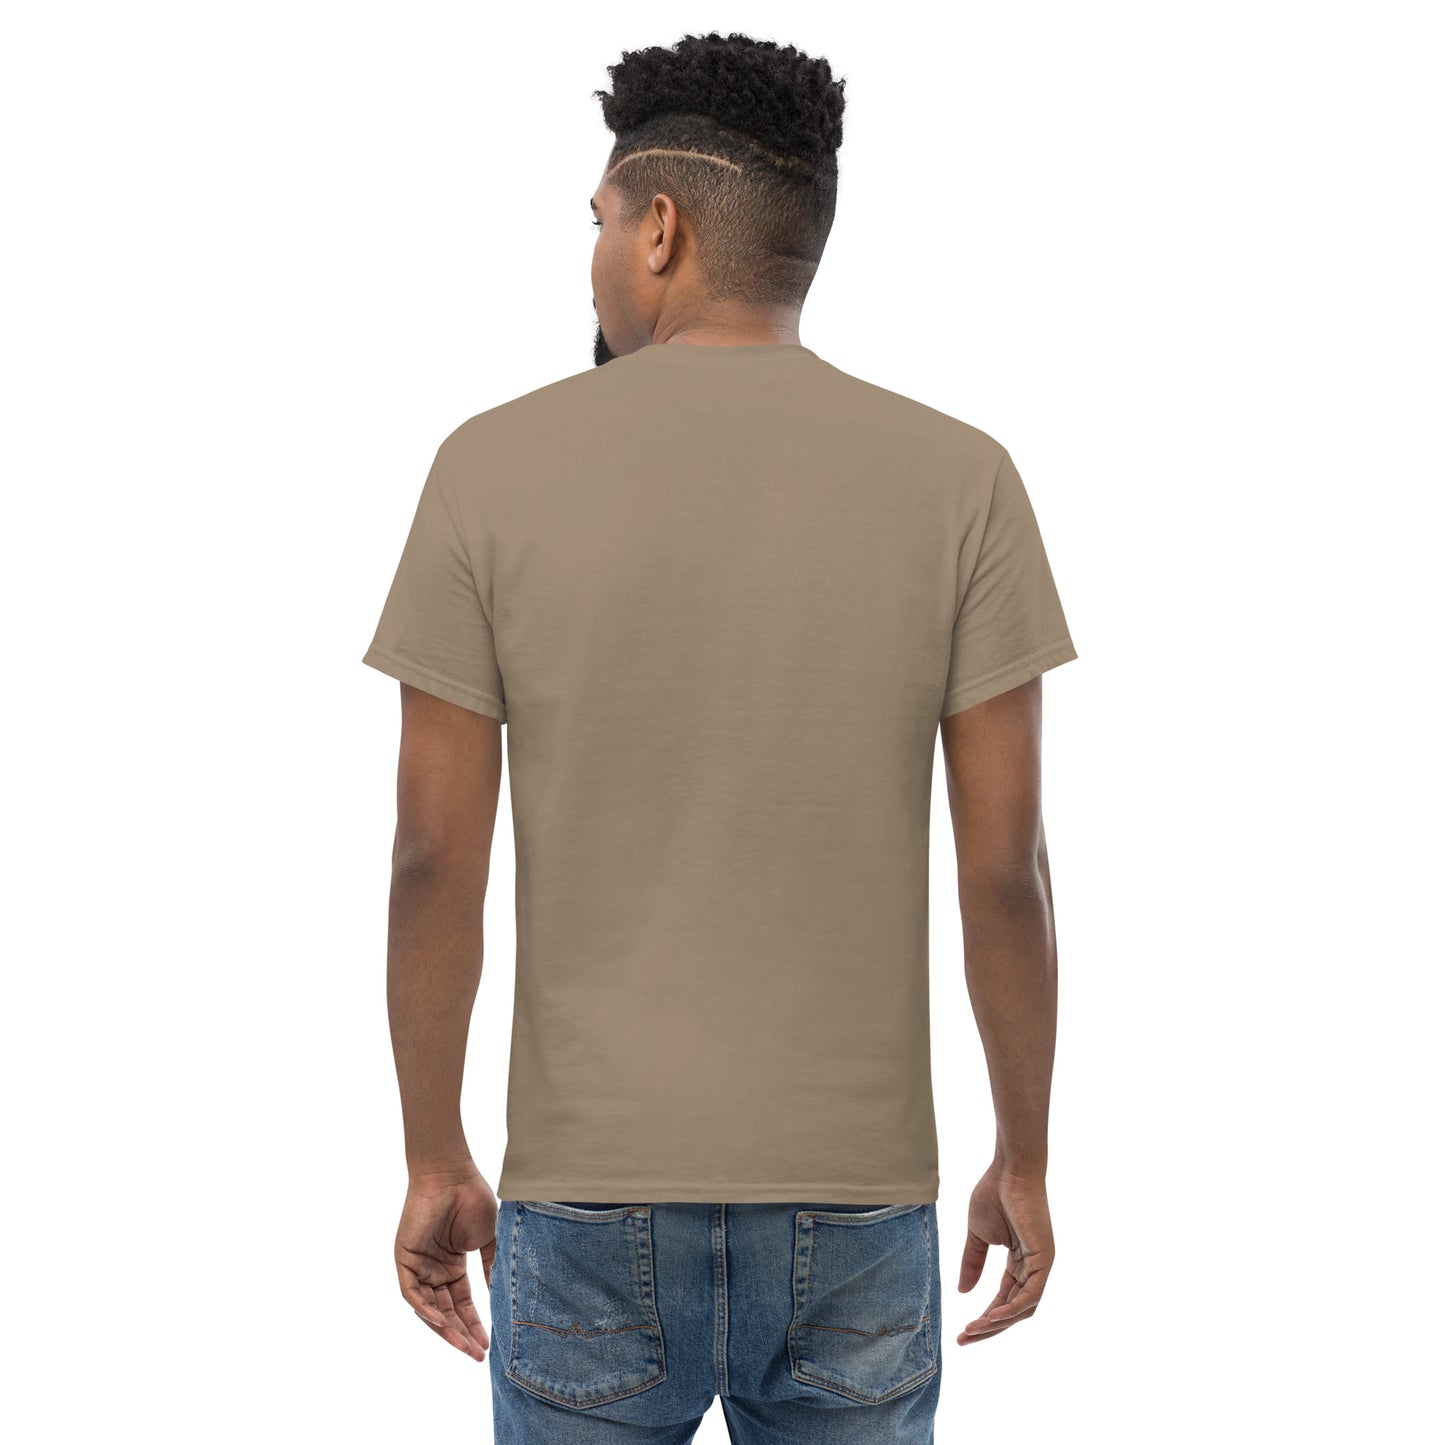 A1. Men's tee with Archimedes logo - Coyote Brown